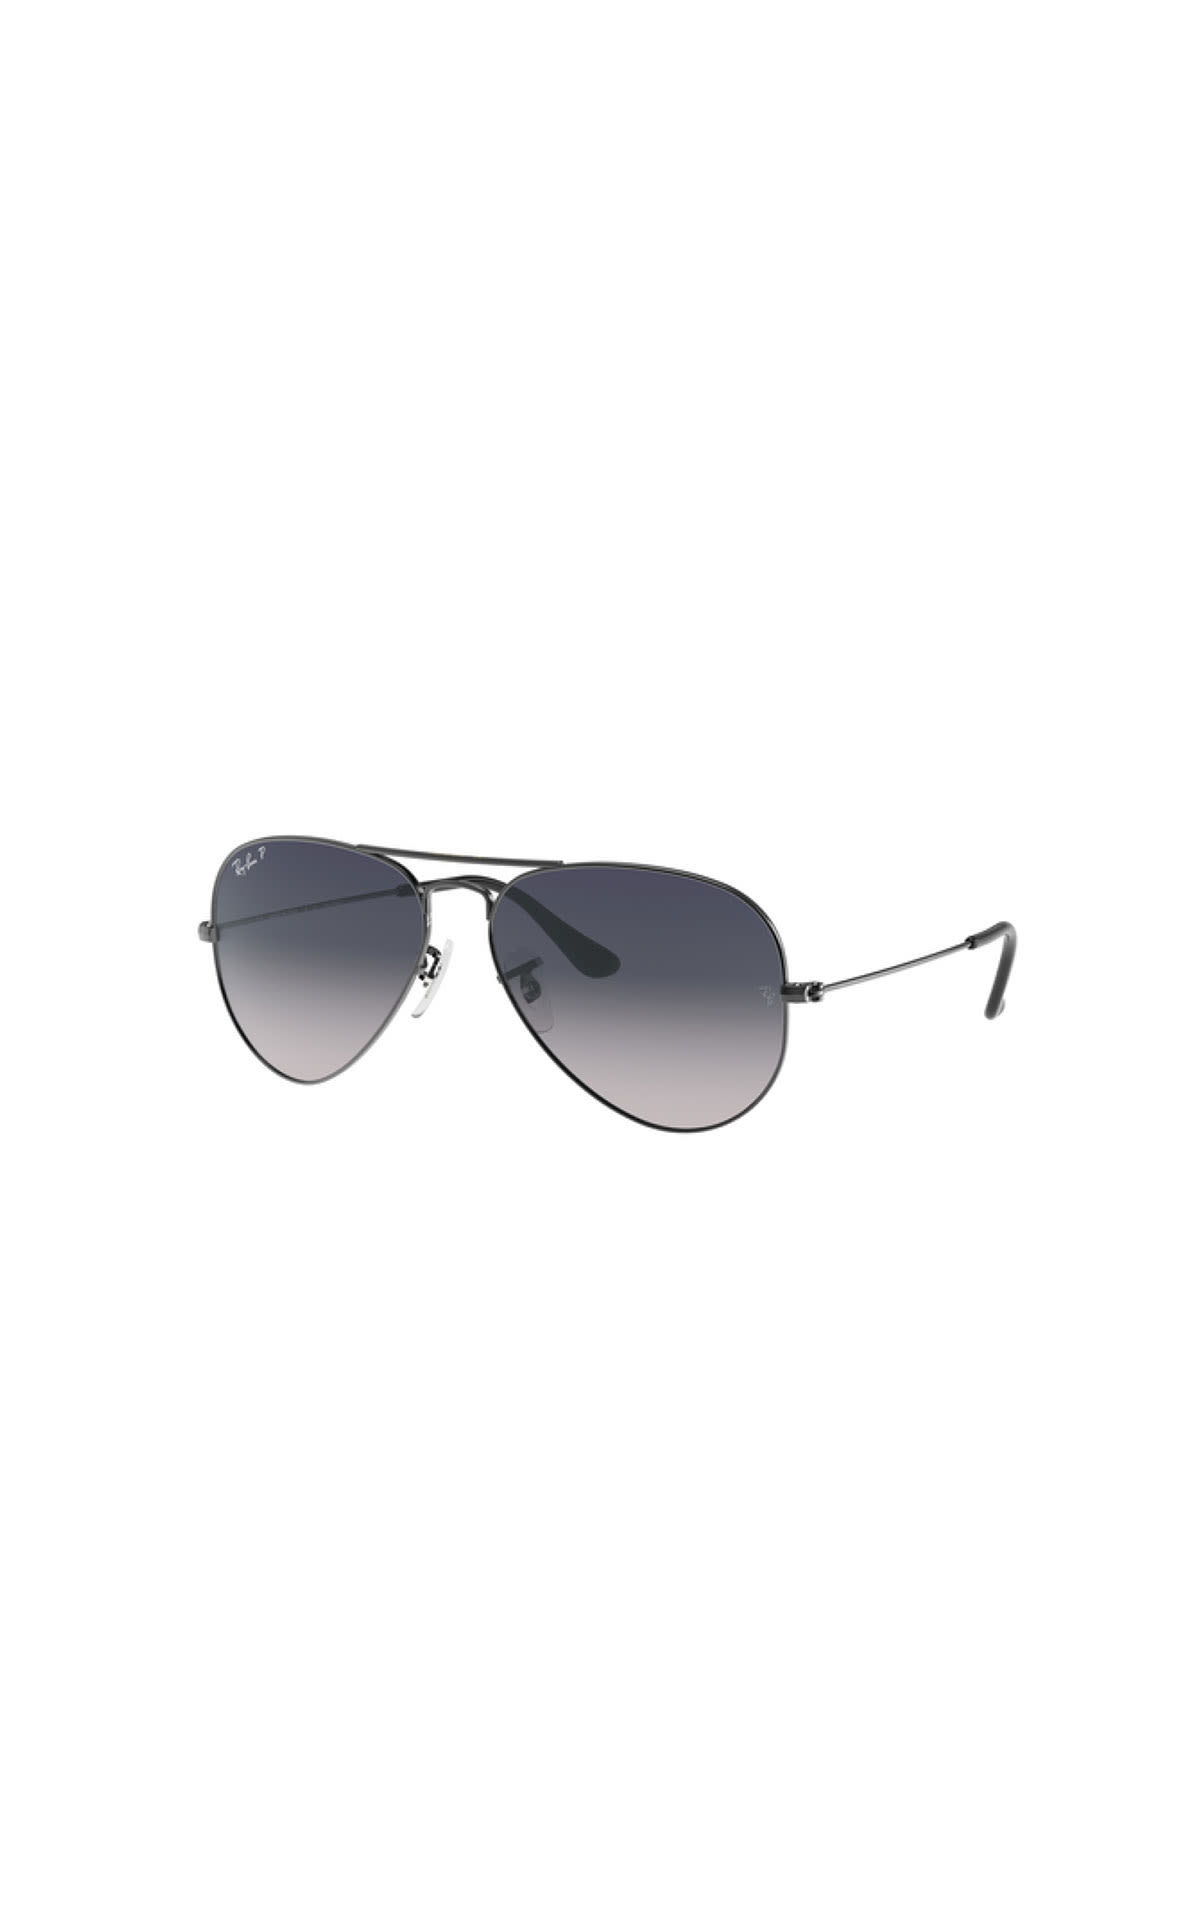 David Clulow Ray-Ban RB3025 58 aviator from Bicester Village